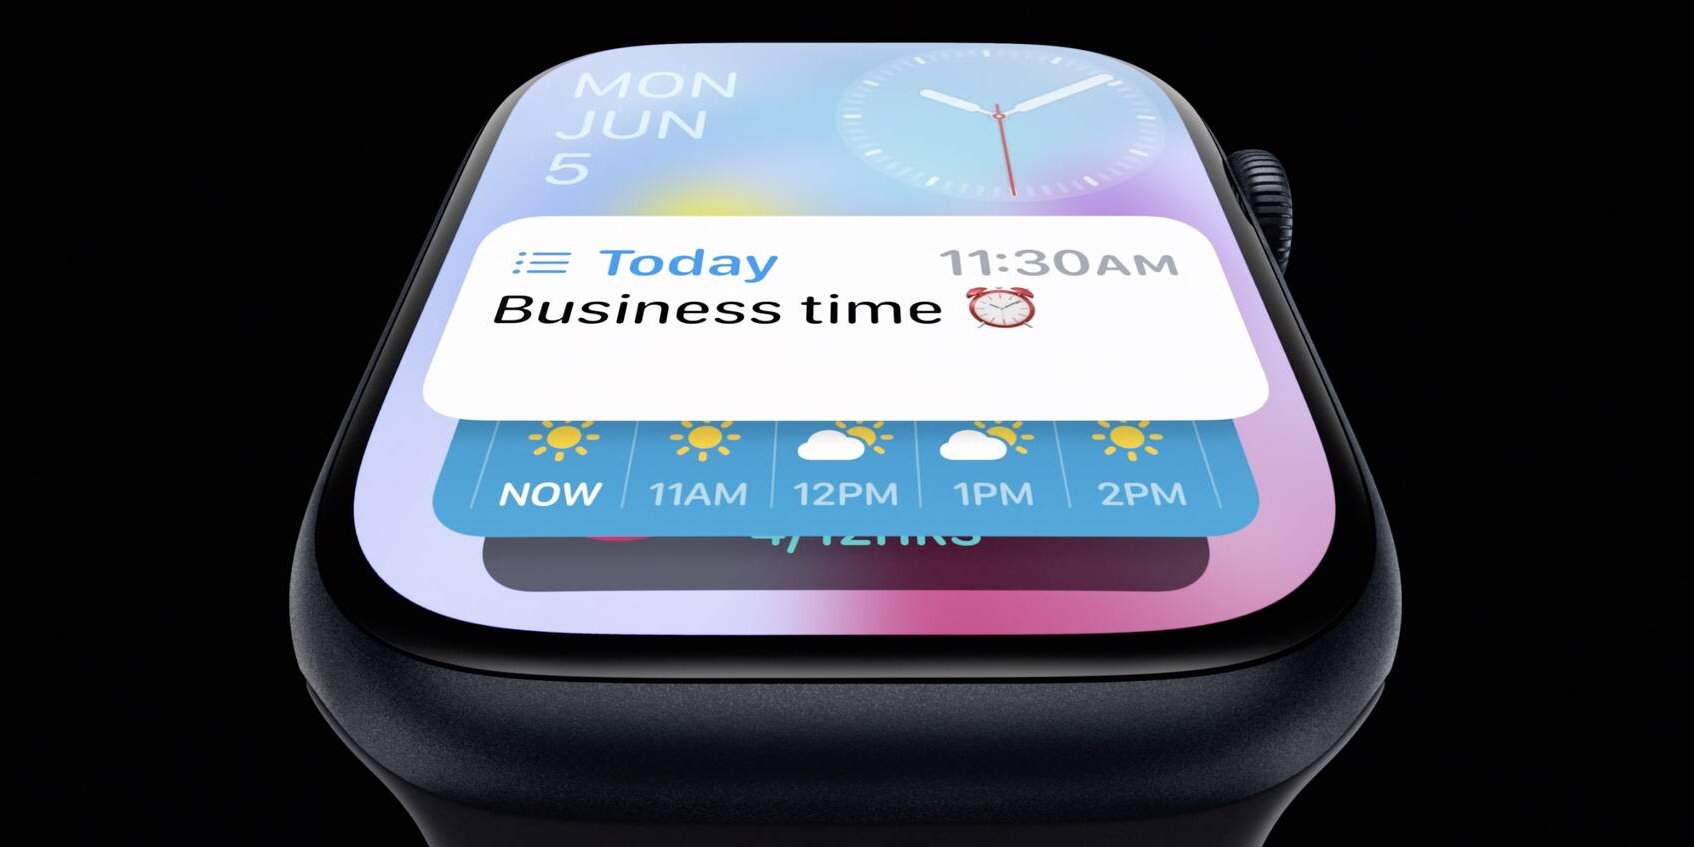 watchOS 10 is introduced with an emphasis on widgets and cycling